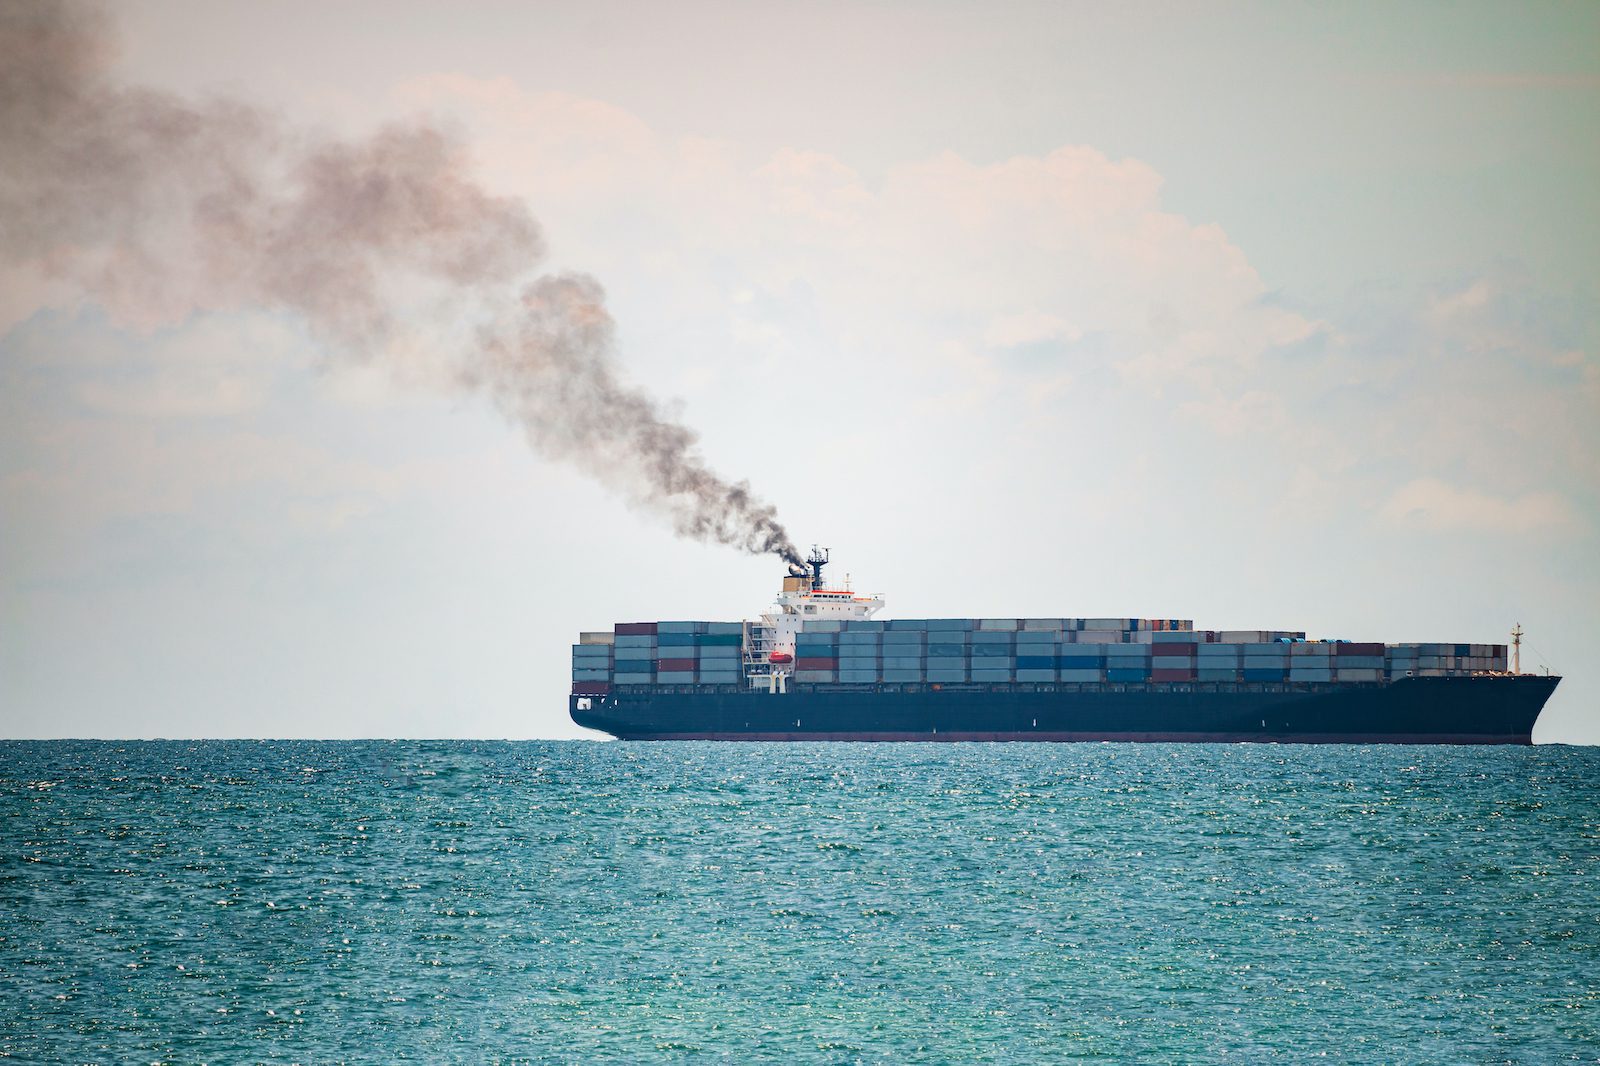 smoke pollution coming from a container ship